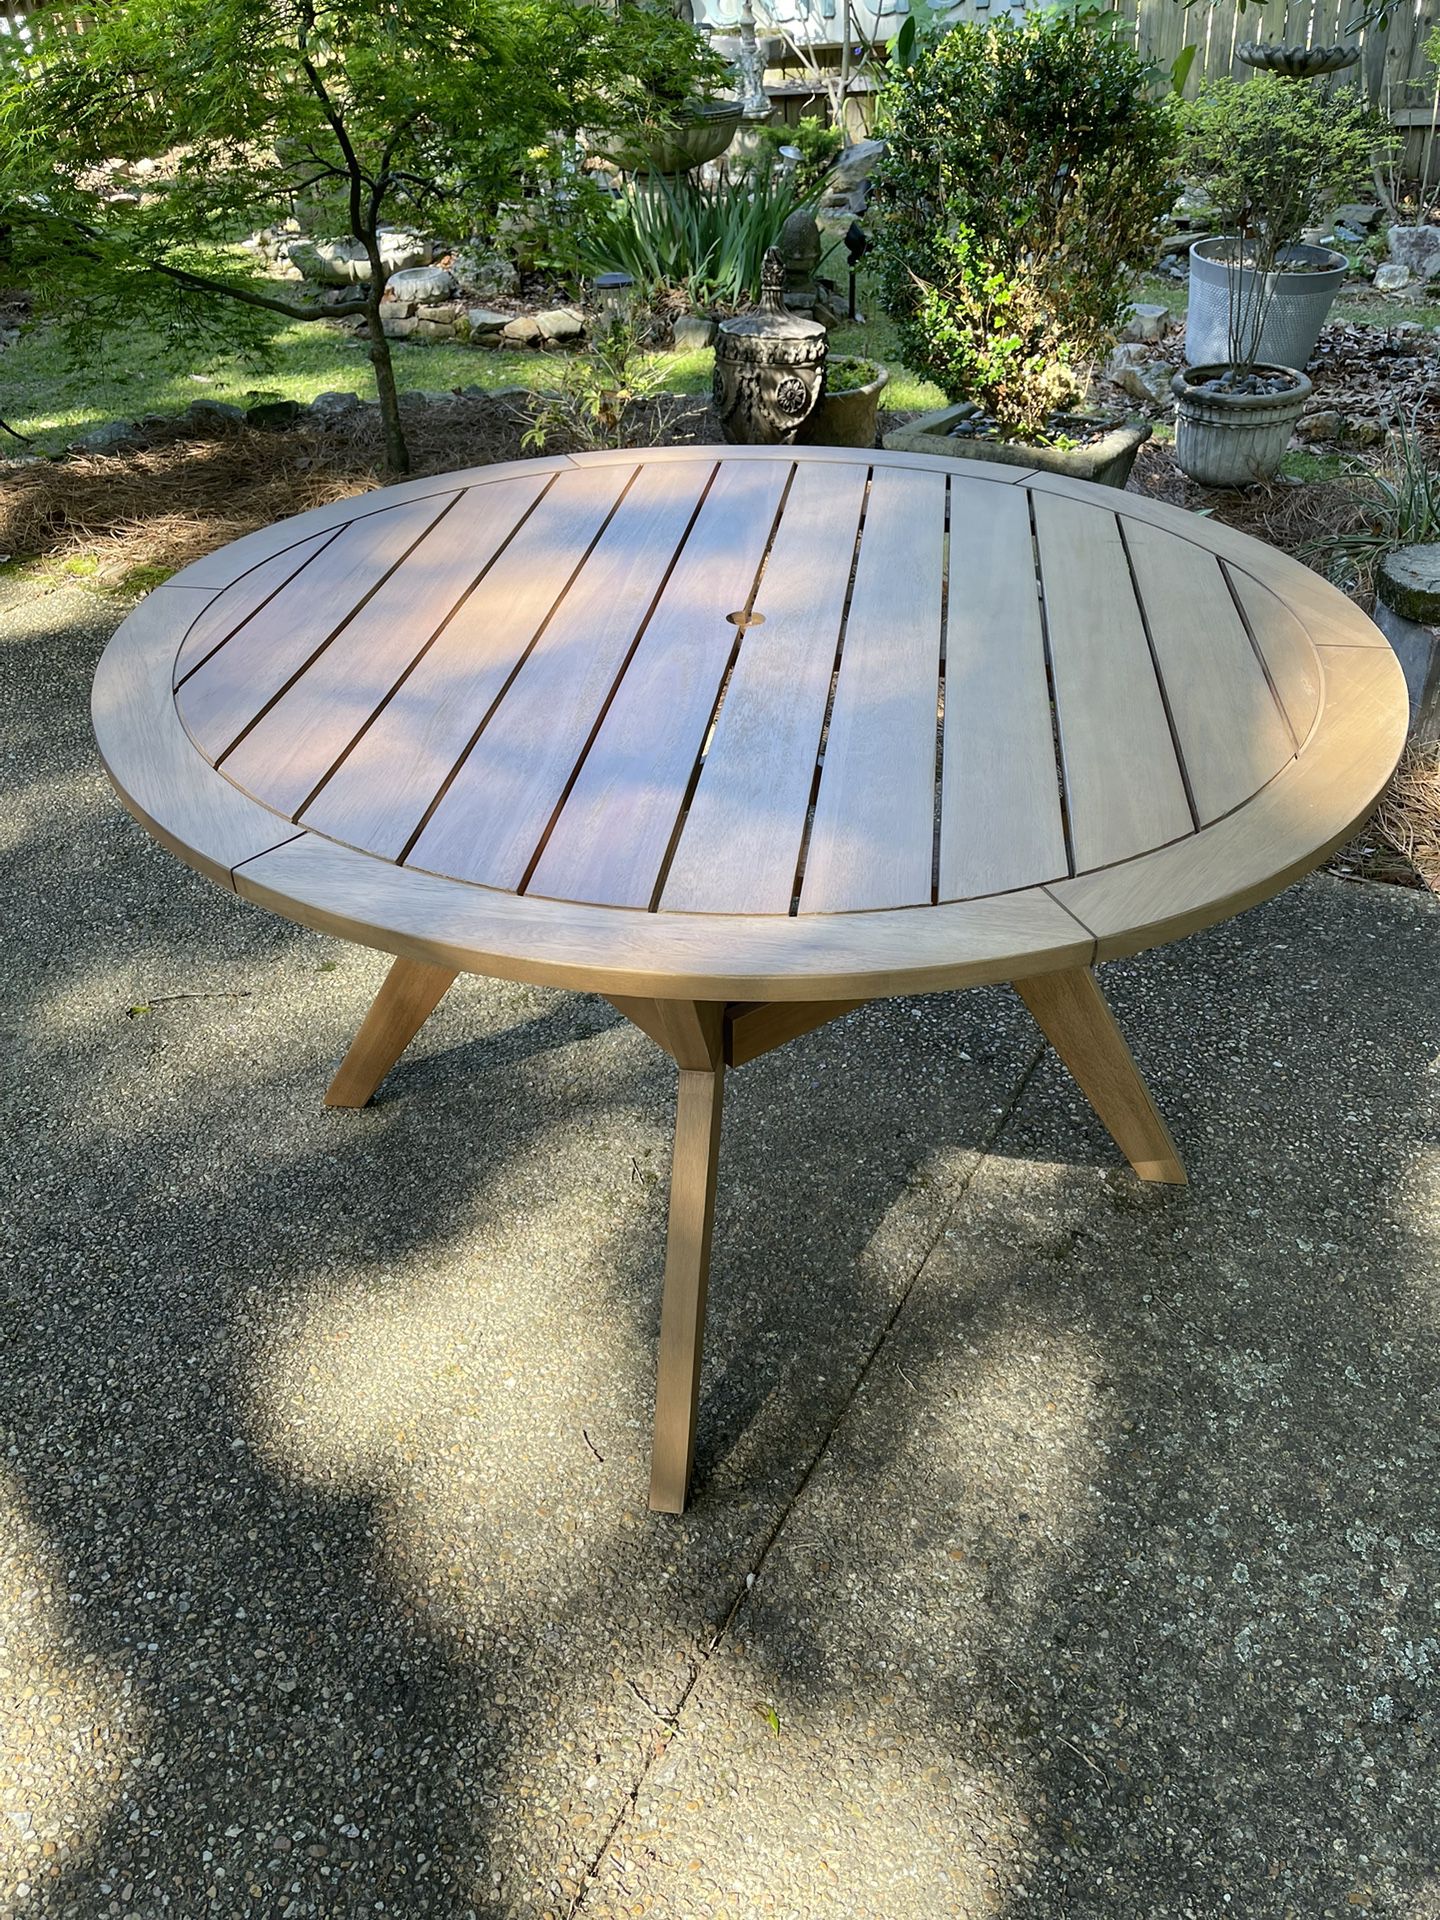 Target Threshold Wooden Outdoor Dining Patio Table